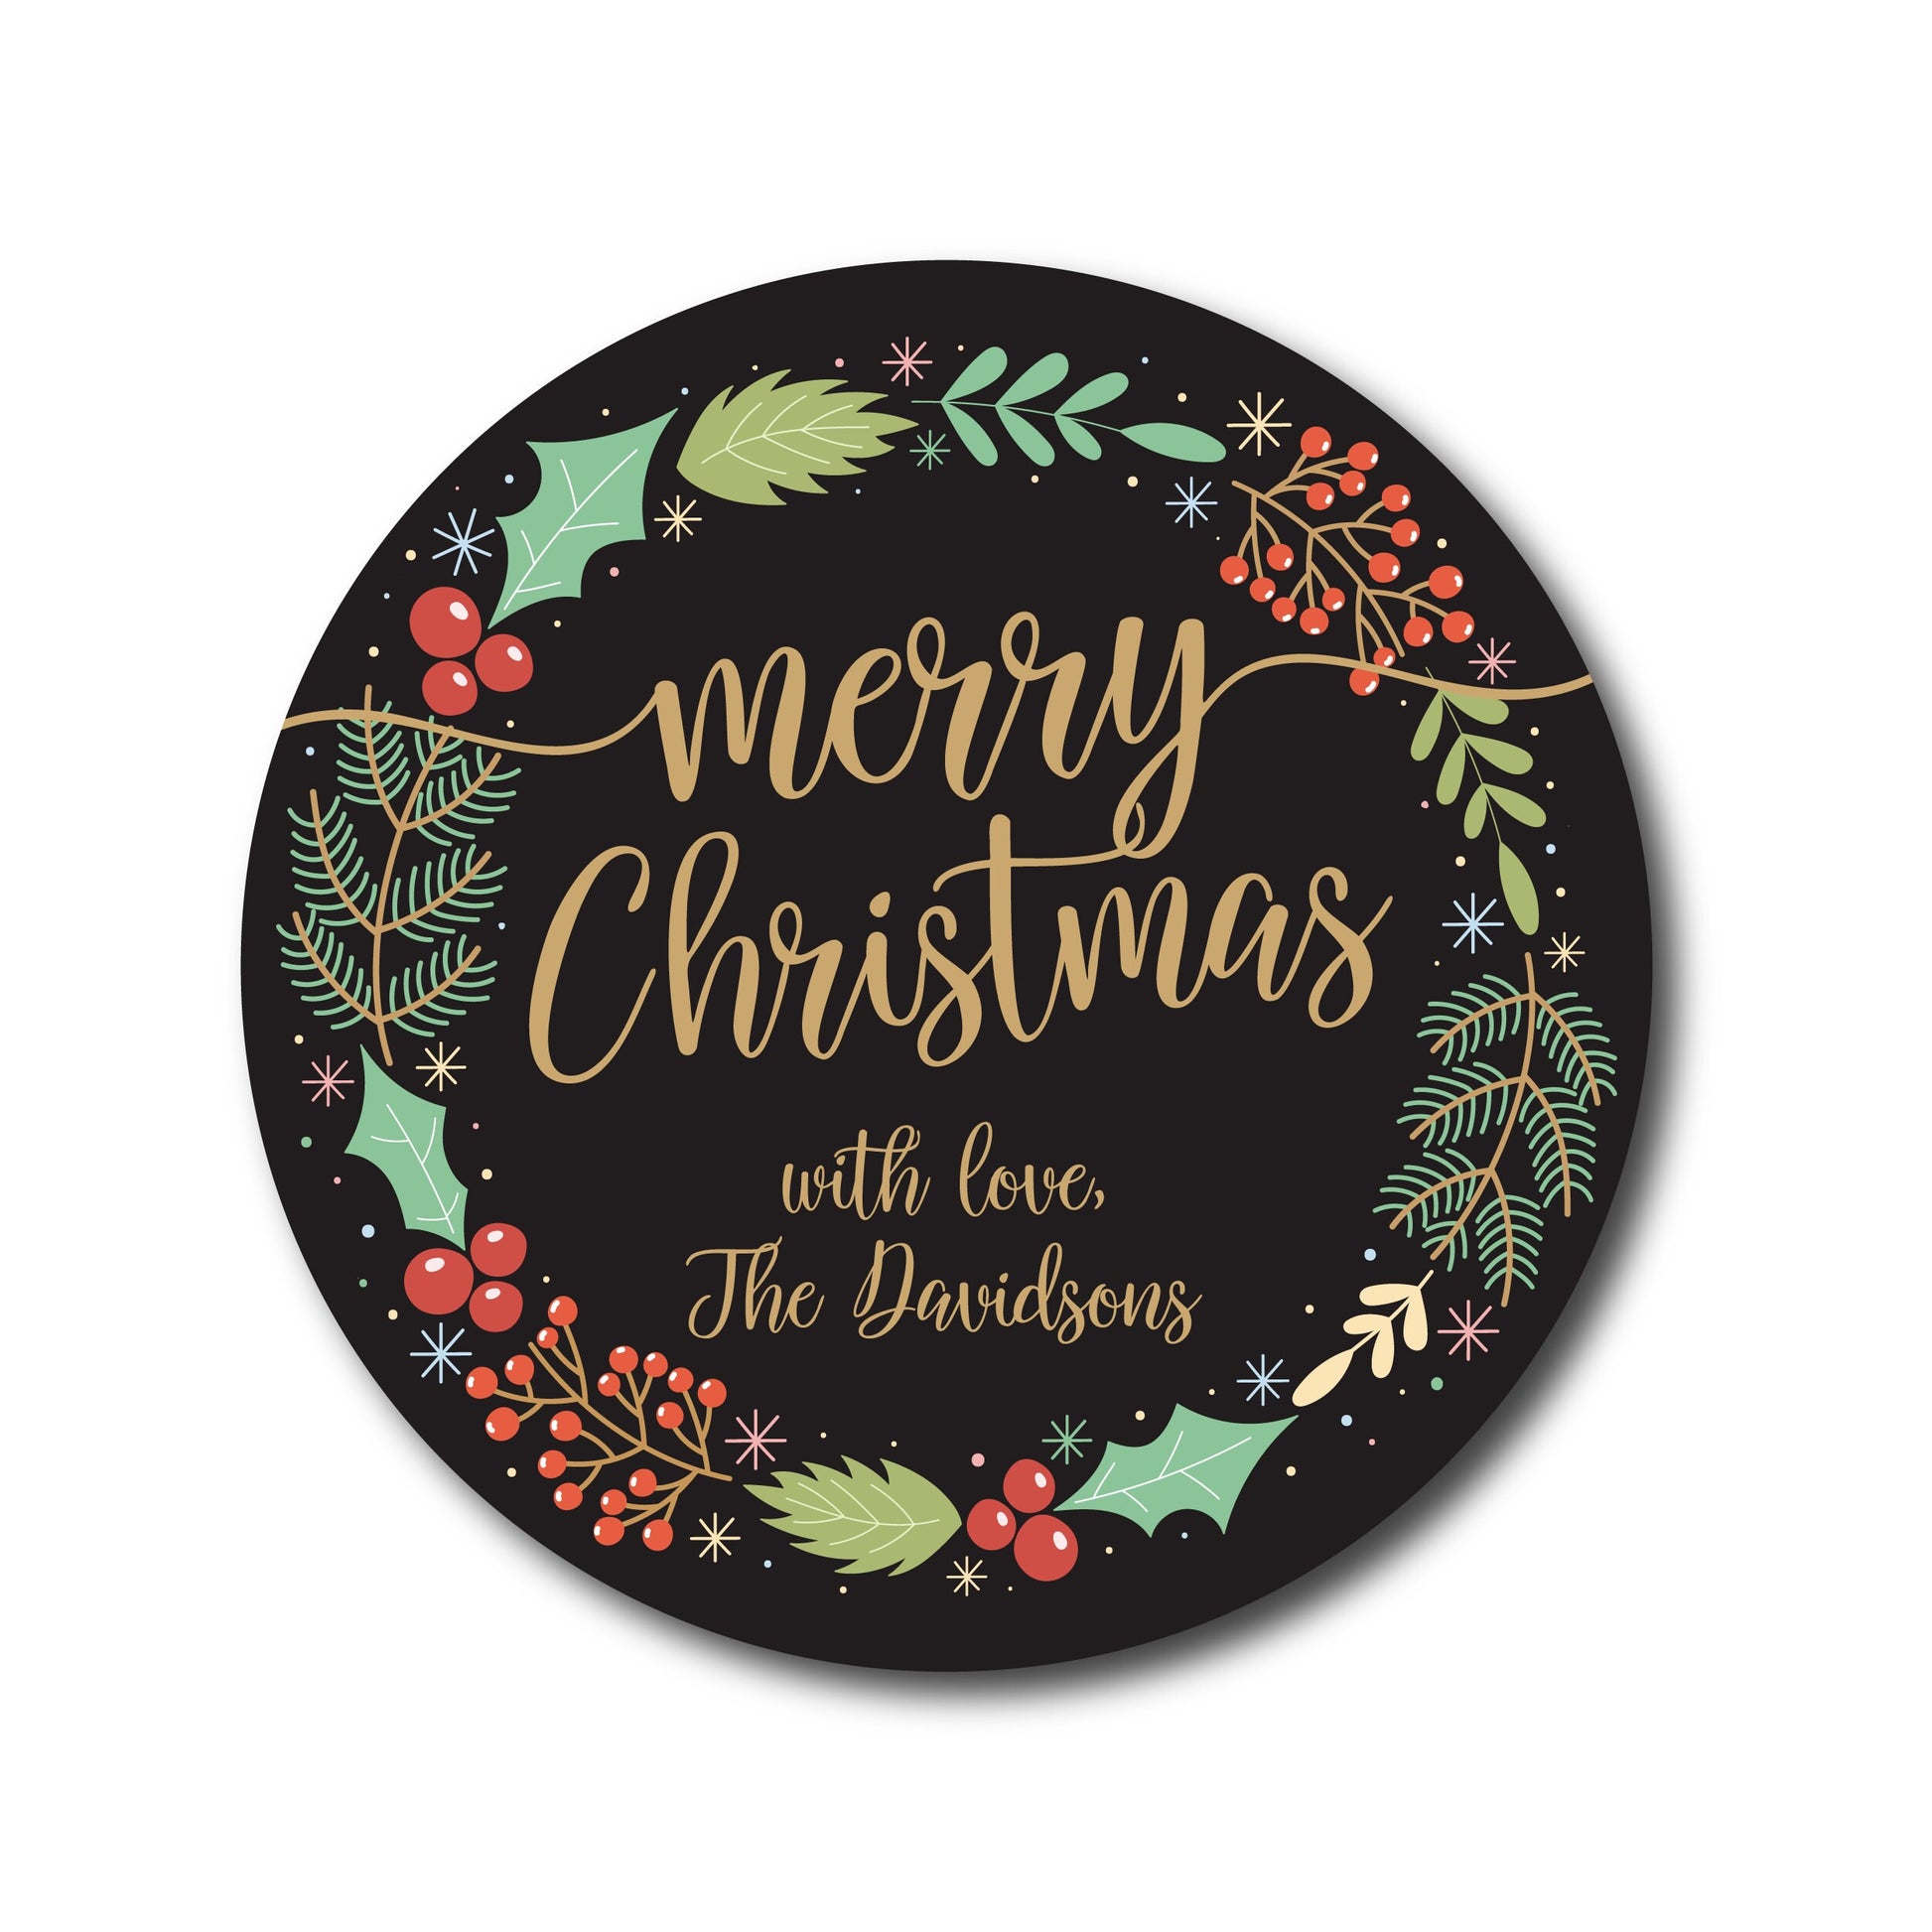 Christmas Gift Label Merry Christmas Sticker Christmas Gift Sticker Christmas Tag Black Gold Stickers Hand Drawn Holiday Label Wreath